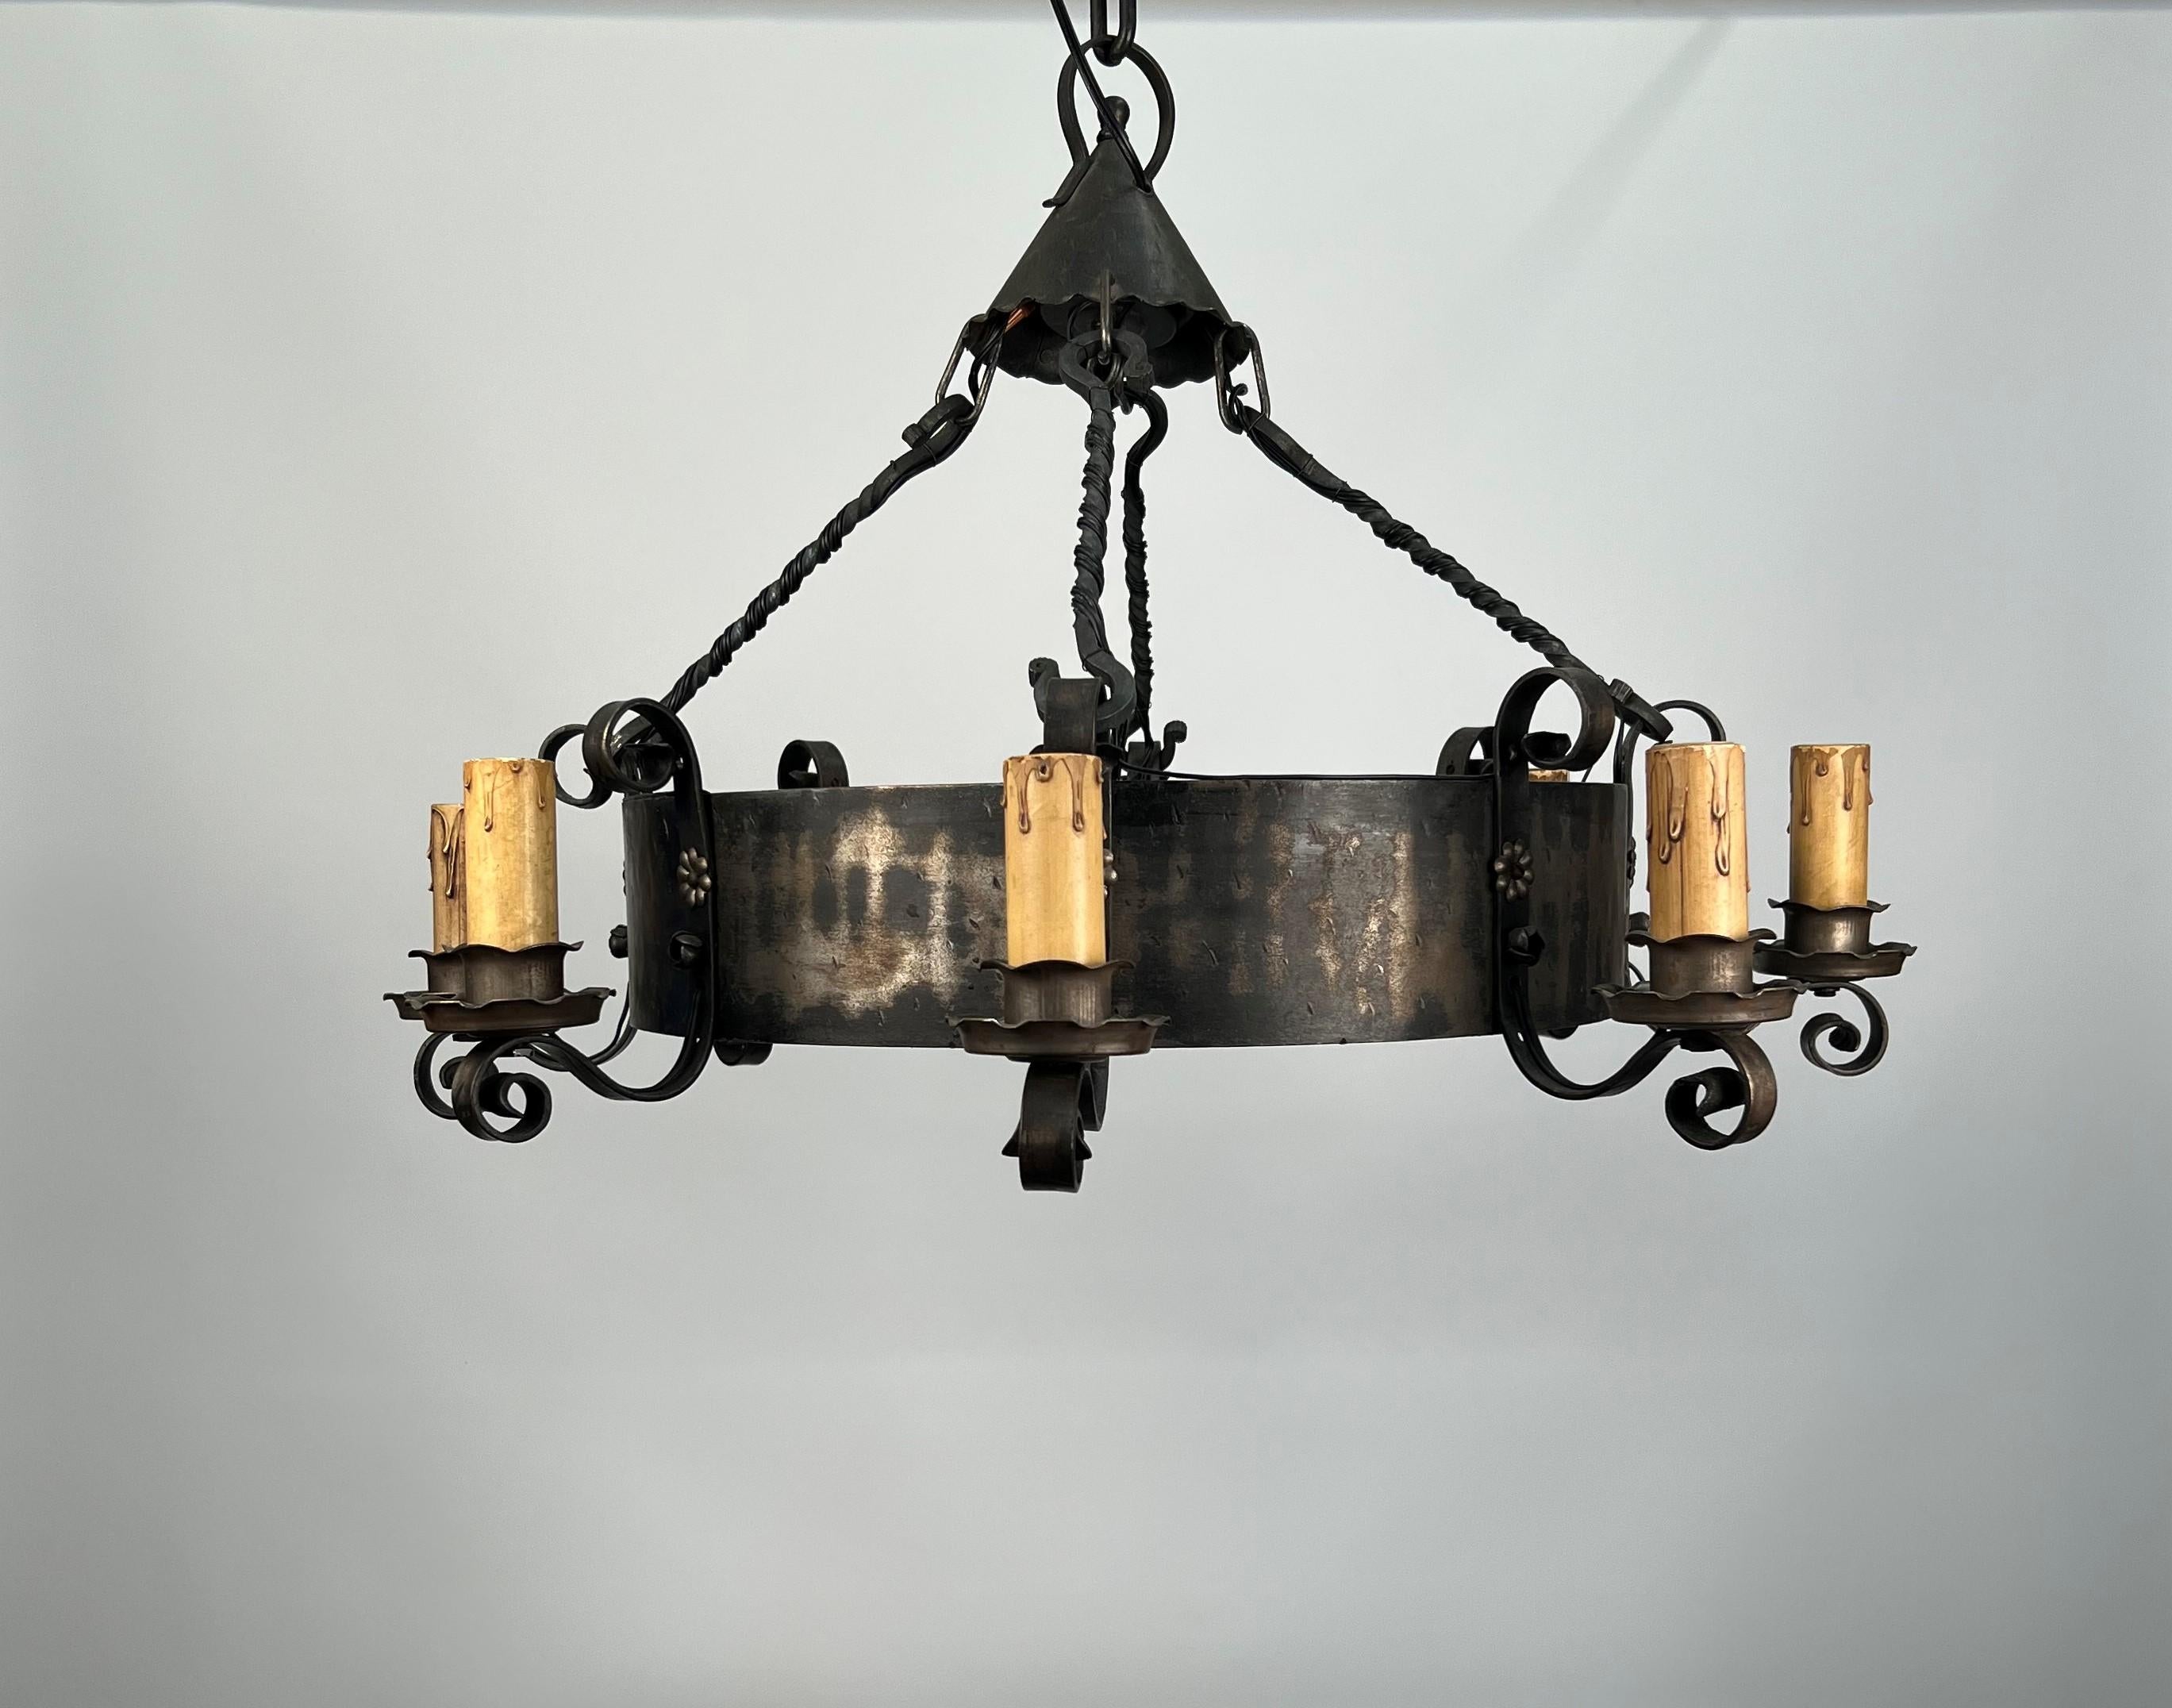 A rustic 1920's American wrought iron chandelier featuring eight medium base candle sockets with original drip candle sleeves. Each of the candles are attached to a central steel strap by a stamped steel rosette and rose holding decorative iron